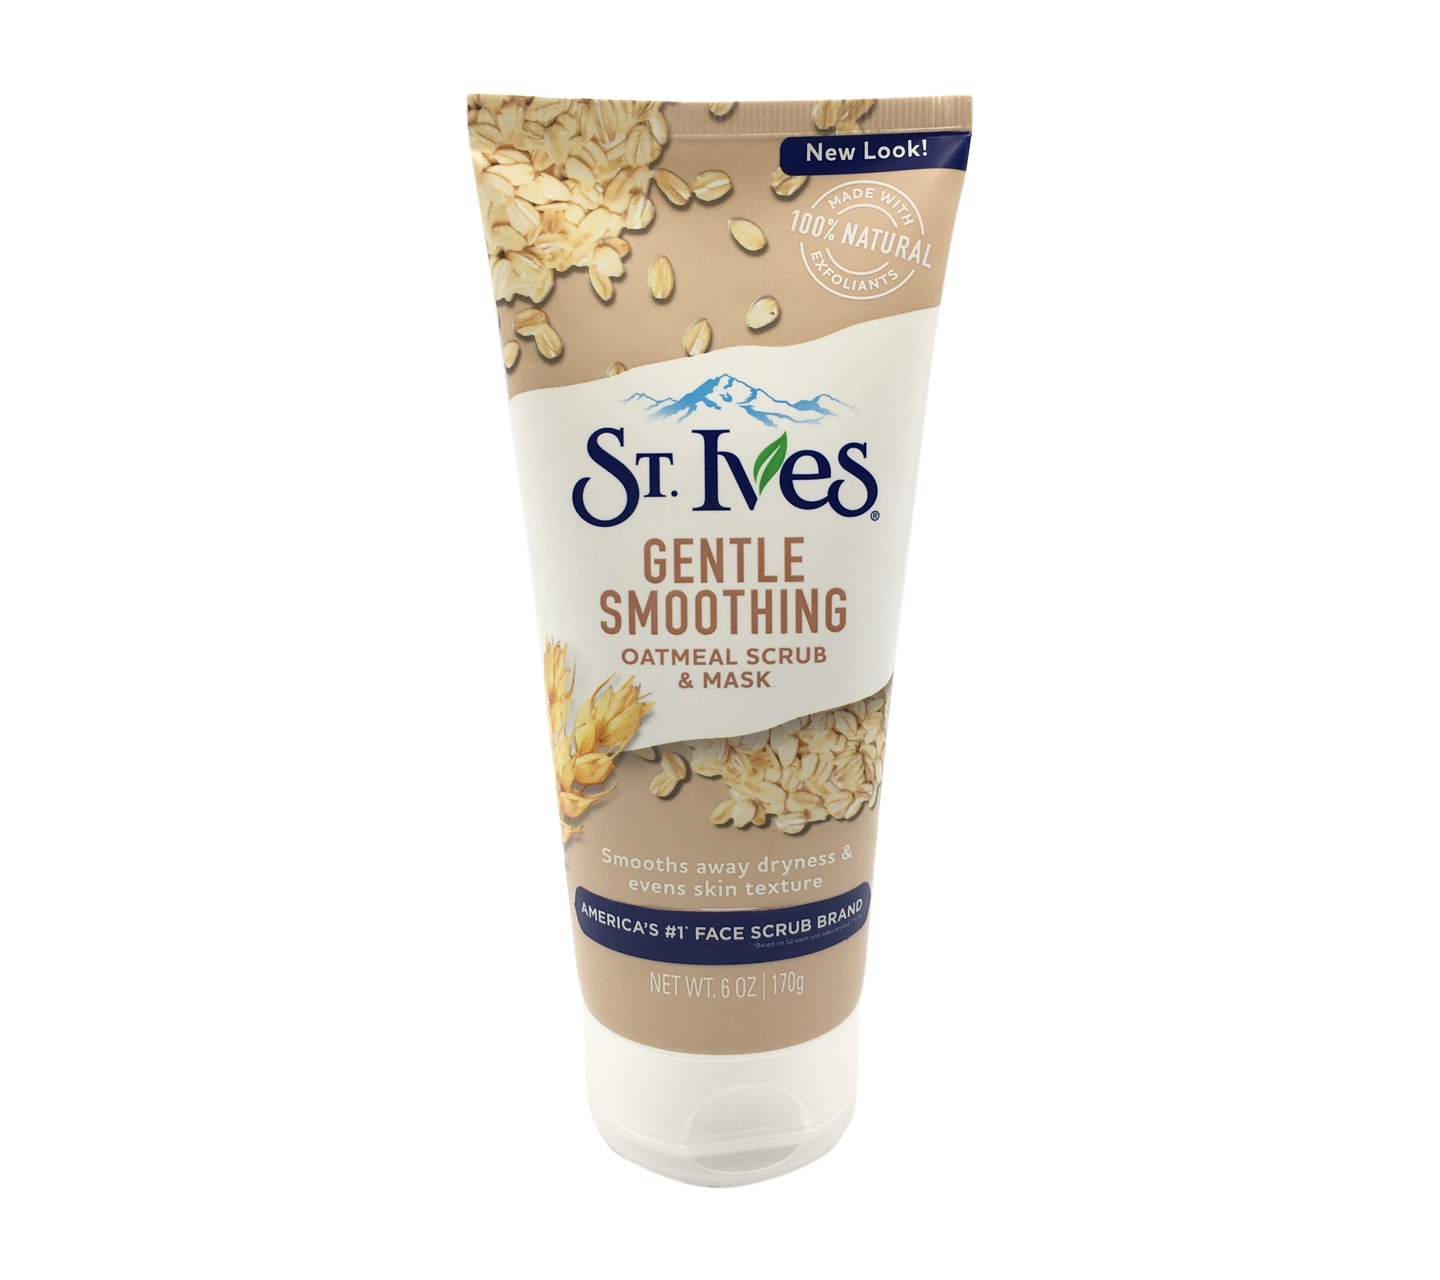 St.ives gentle smoothing oatmeal scrub & mask